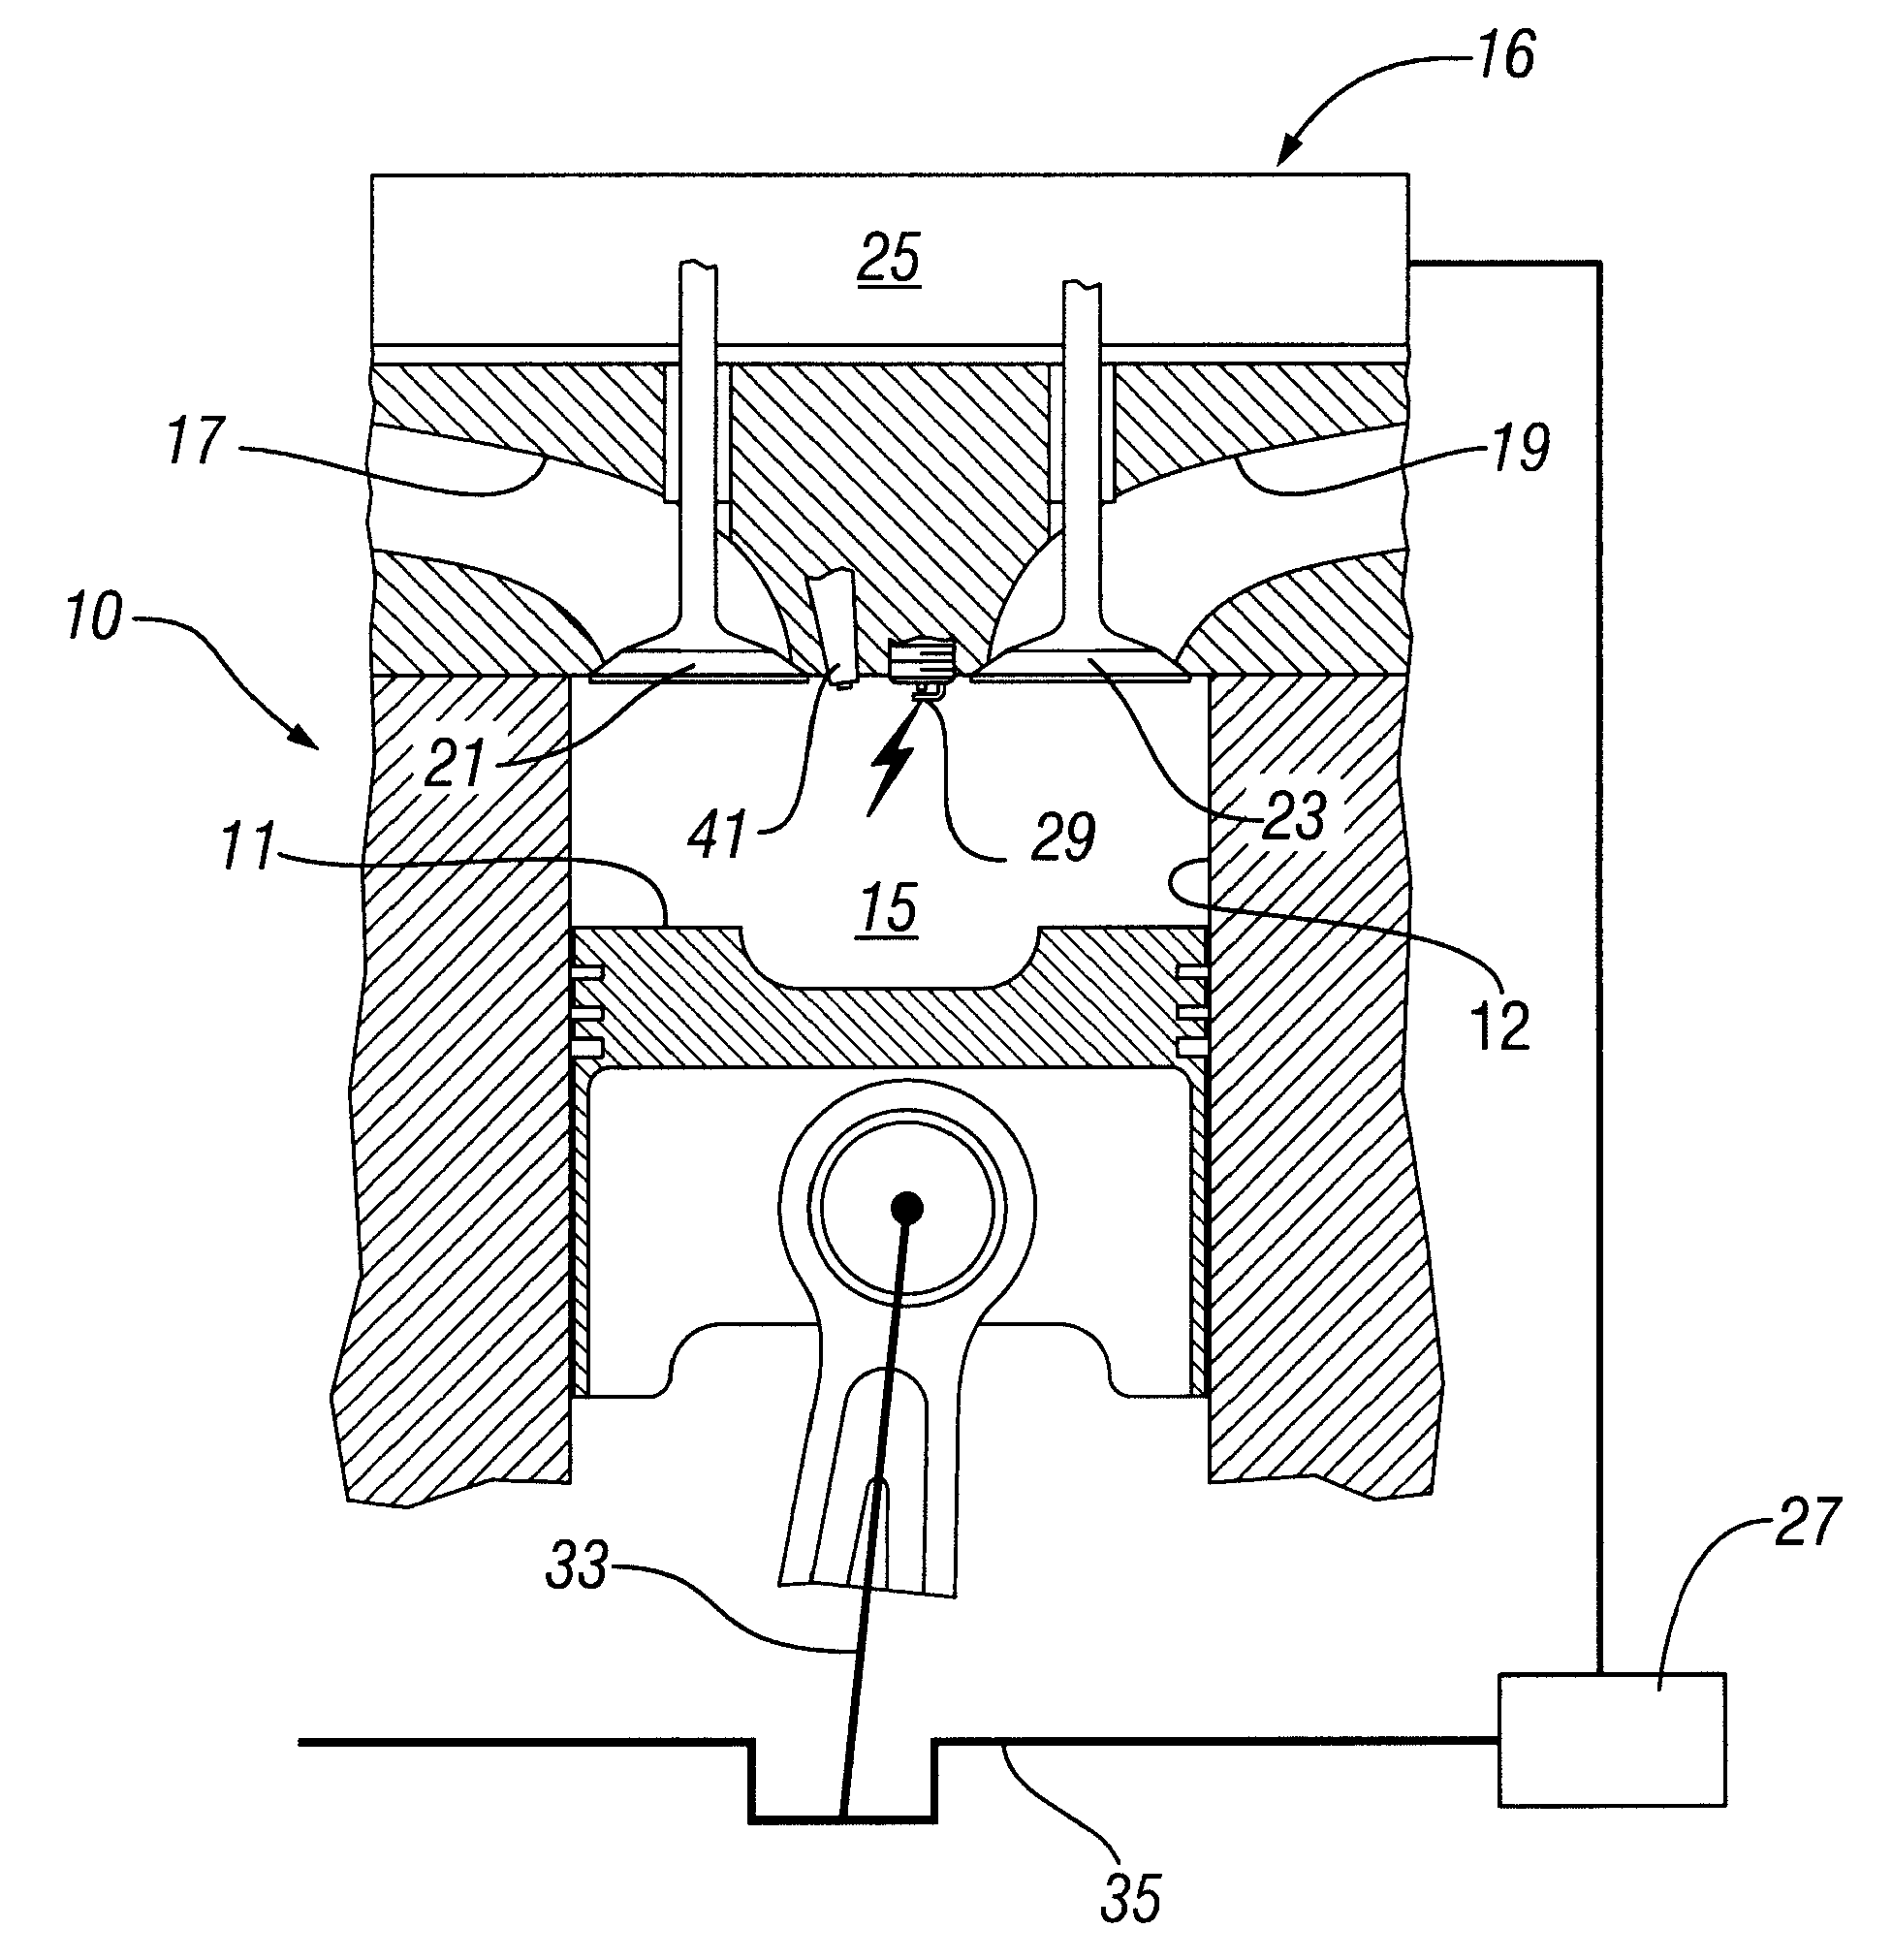 Fuel adaptation in a homogeneous charge compression ignition engine